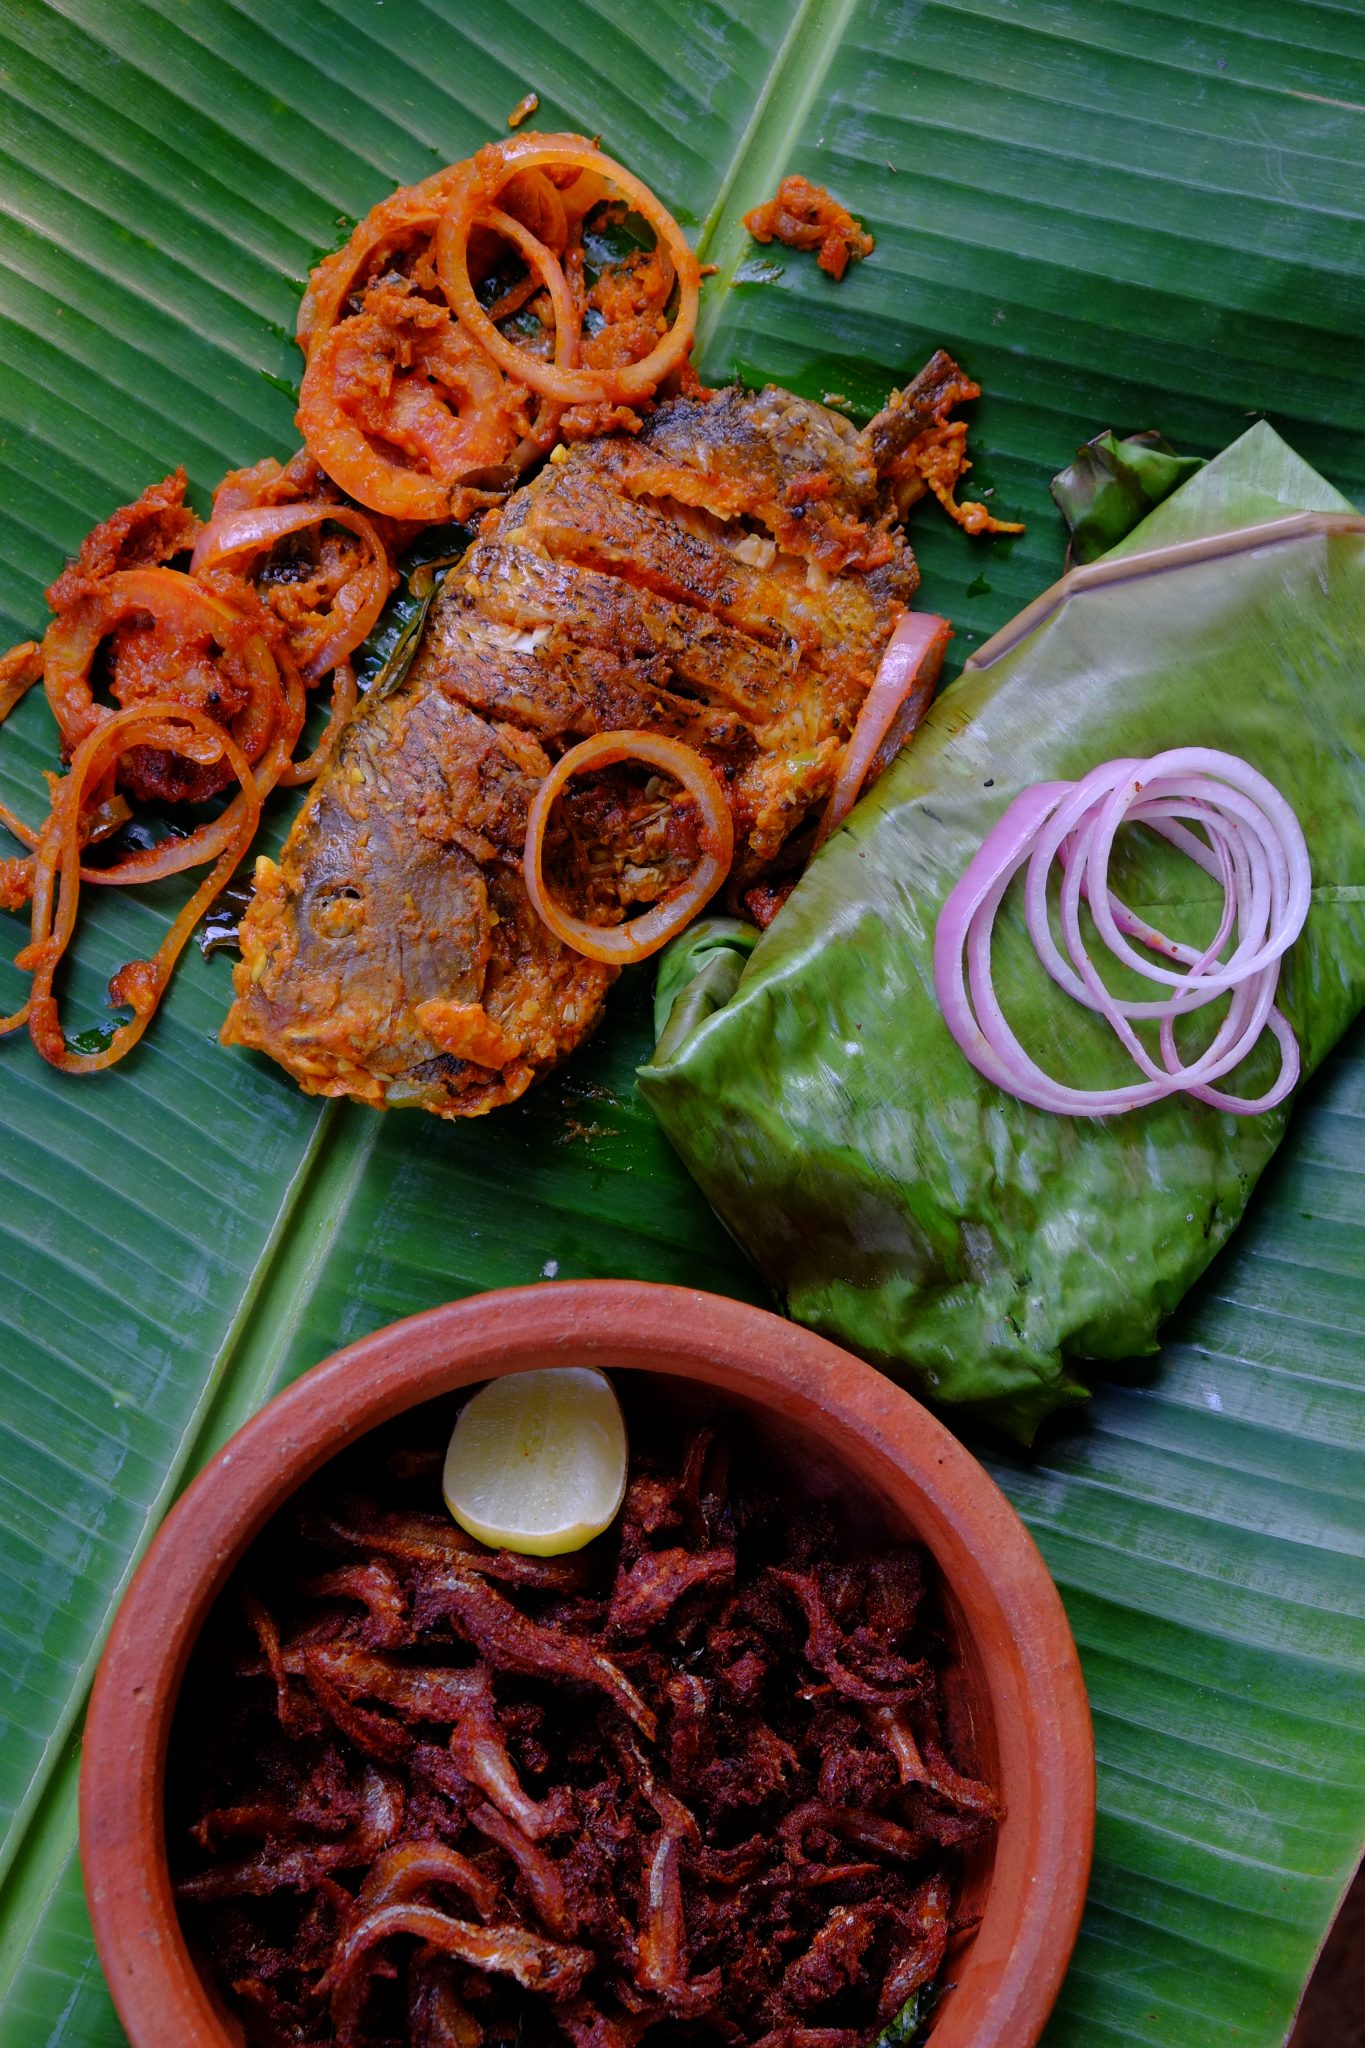 FISH WRAPPED IN BANANA LEAF (MEEN POLLICHATHU)